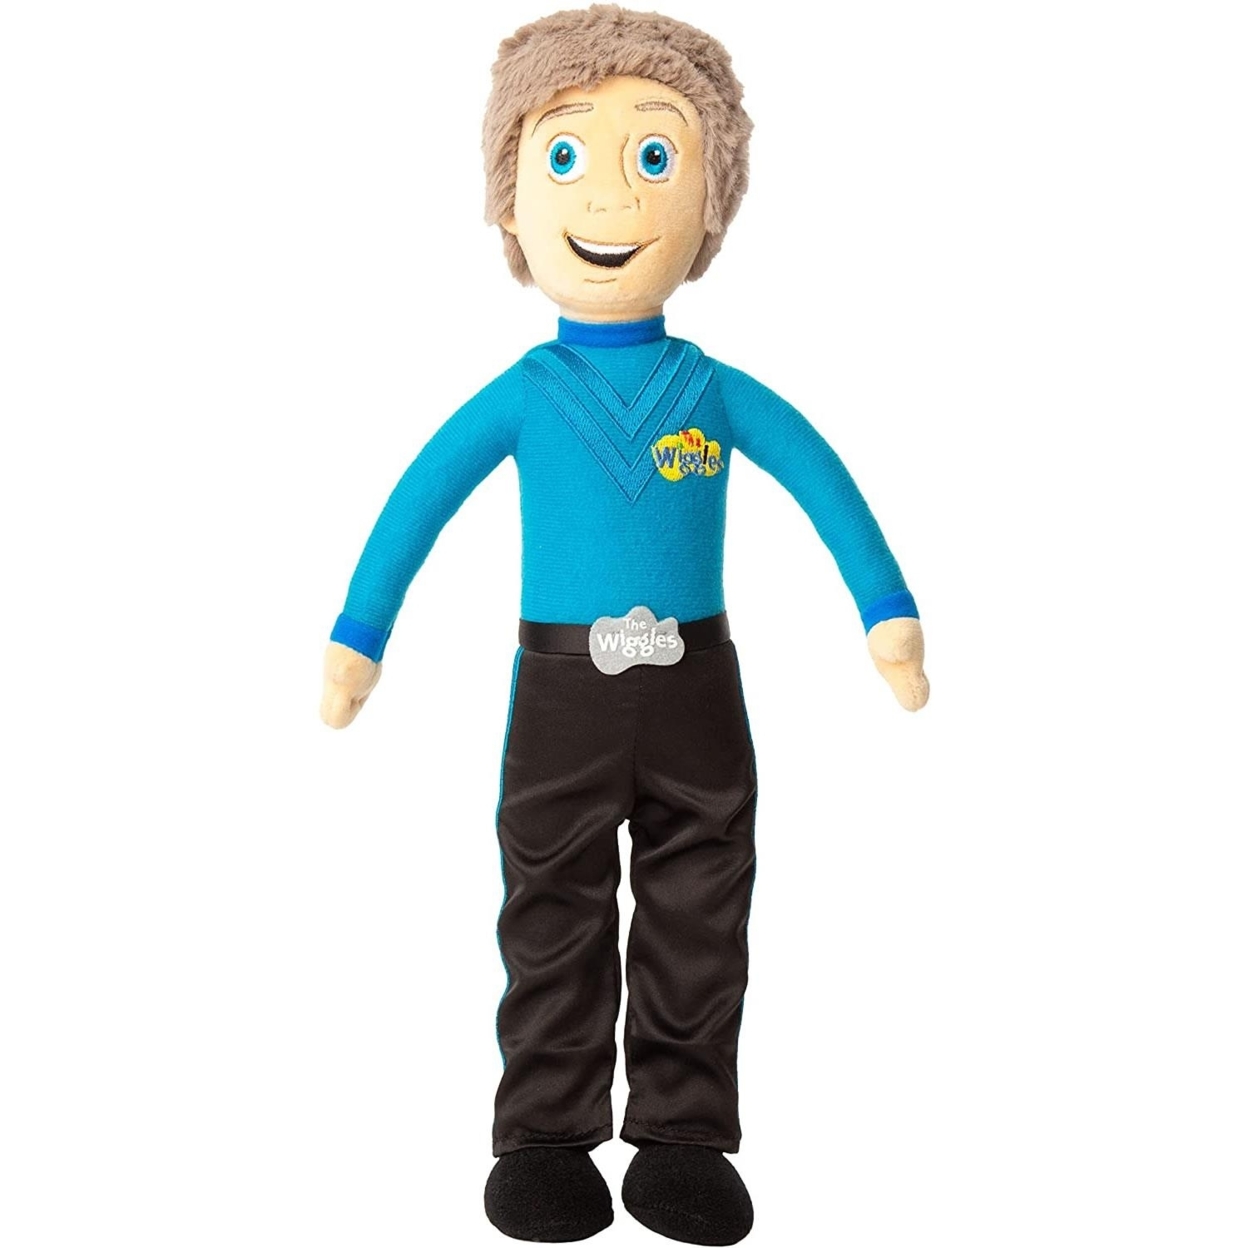 The Wiggles Blue Wiggle Anthony Field 14 Plush Doll Childrens Musical Group Mighty Mojo